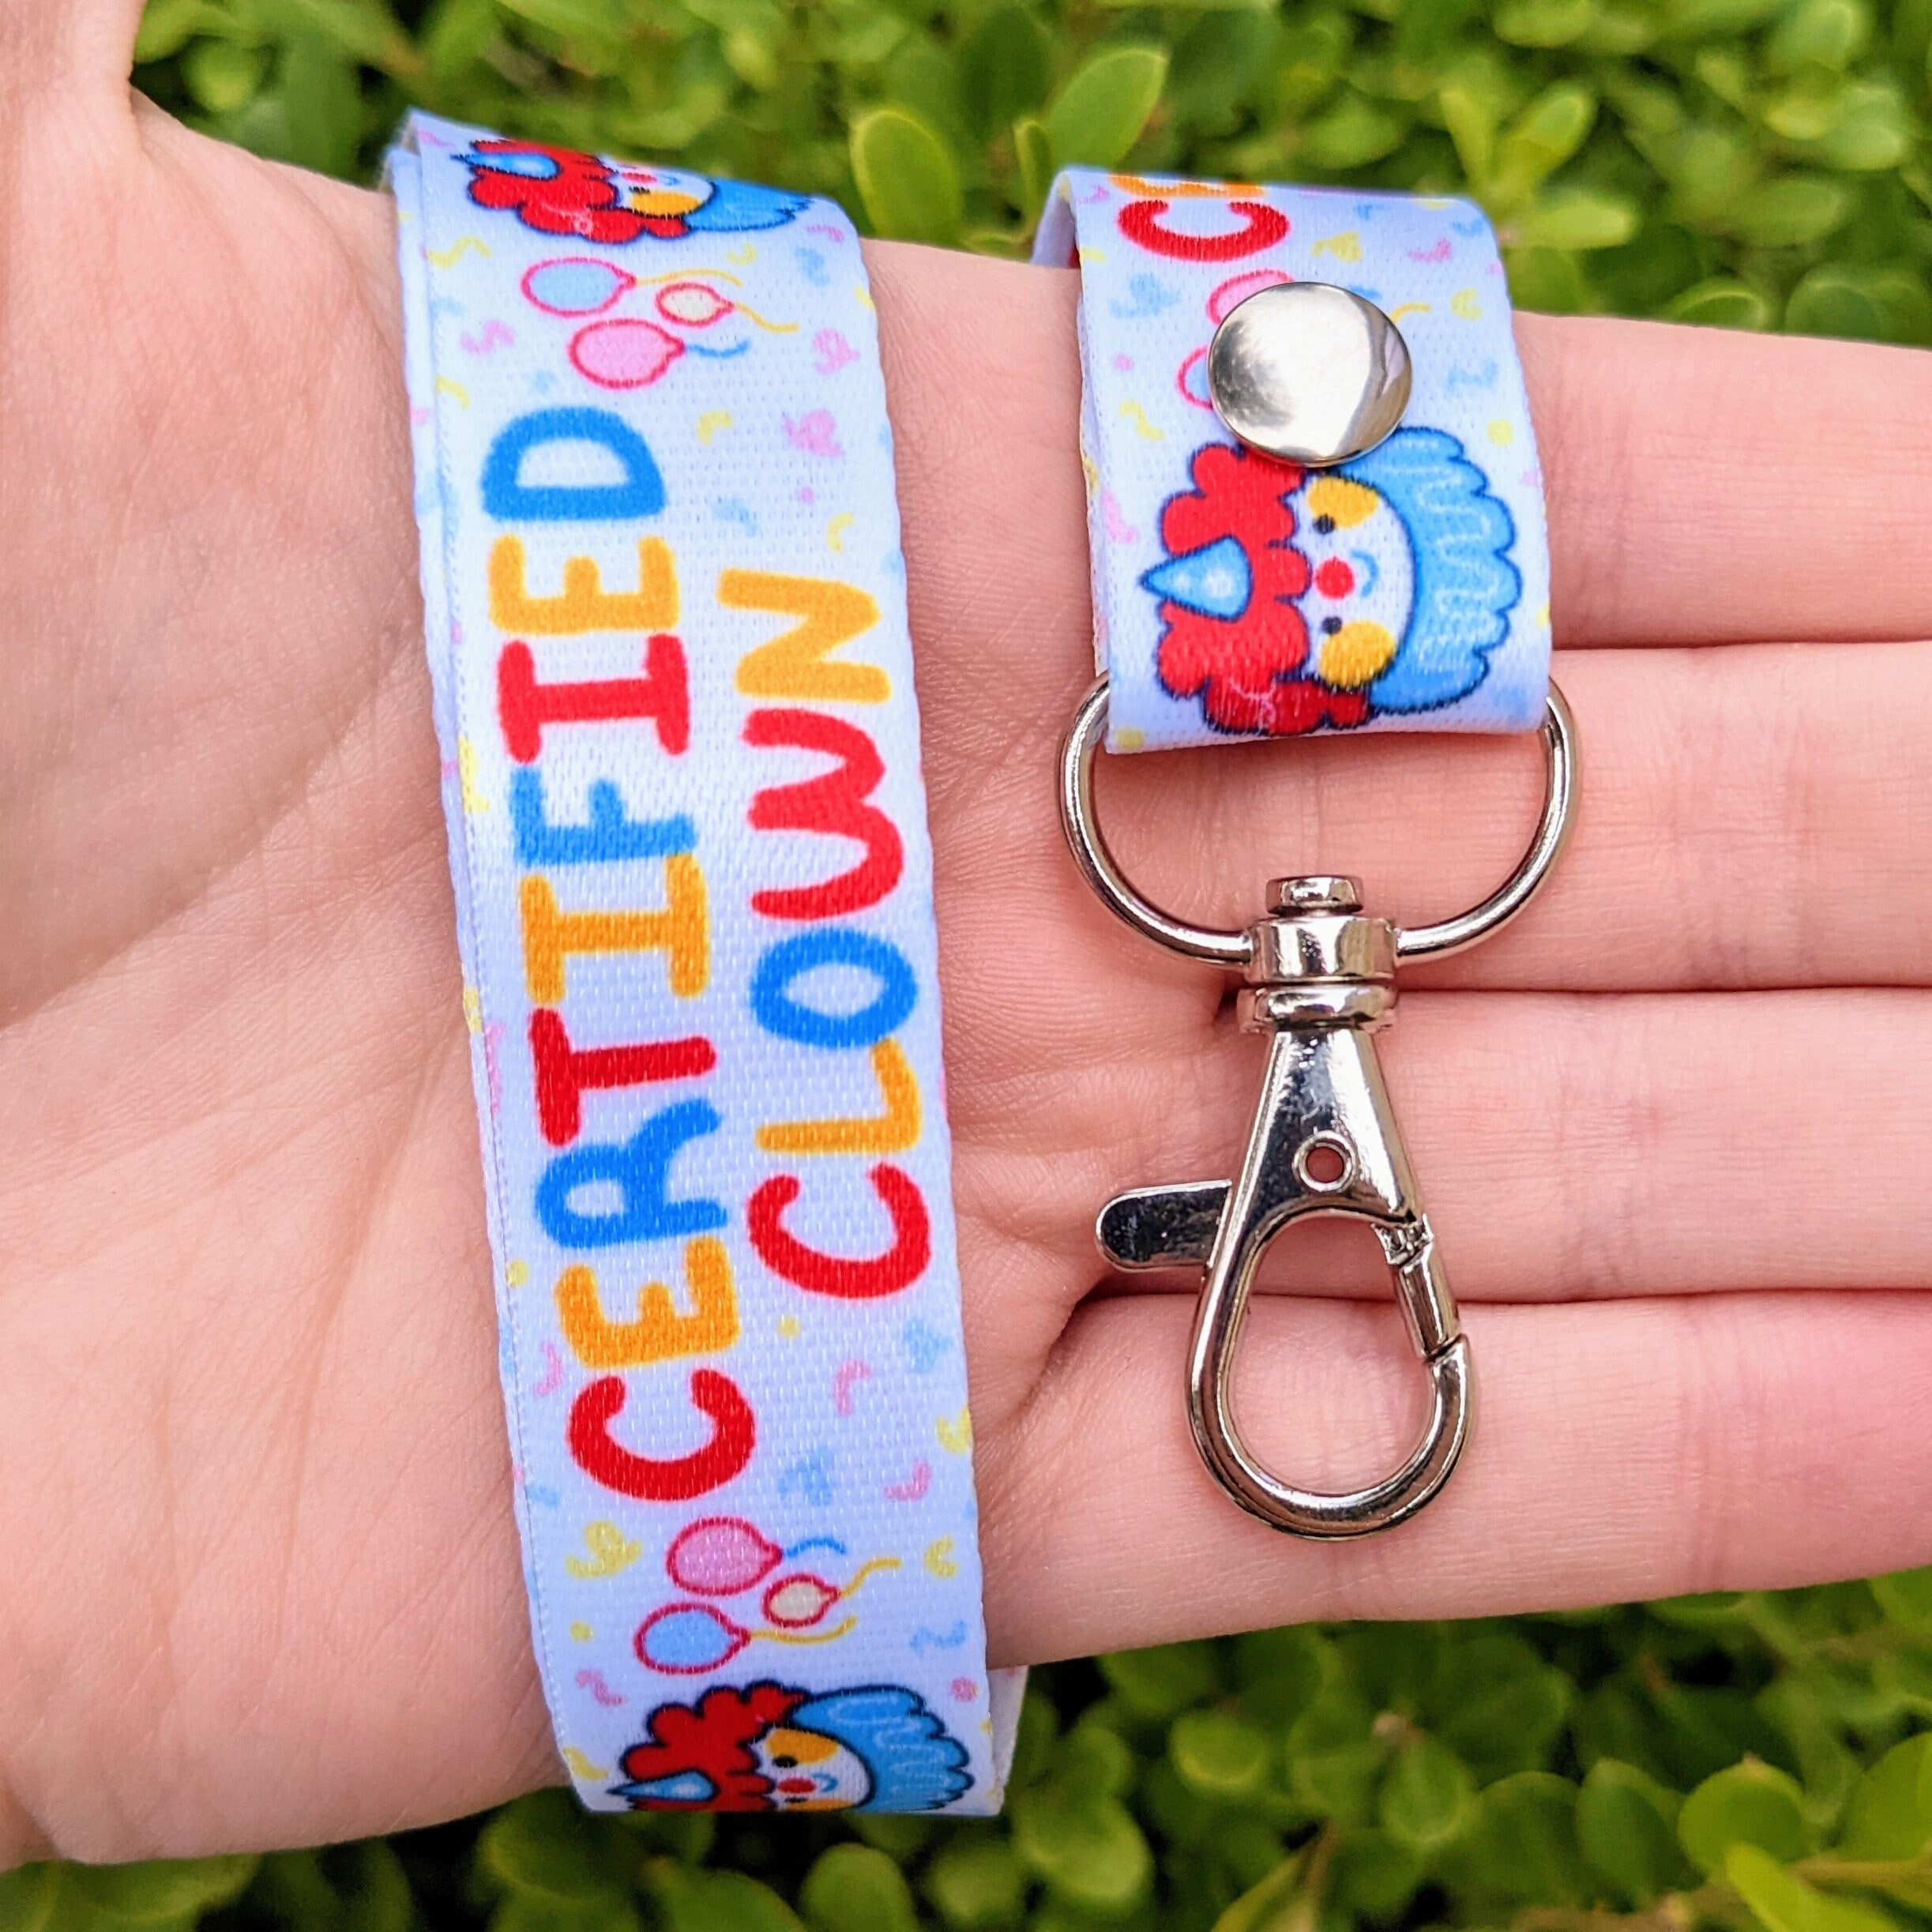 Clown Acrylic Keychain, Clowncore Aesthetic, Clown Charm, Circus Keychain,  Cute Keychain for Keys, Colorful Accessories, Quirky Gifts